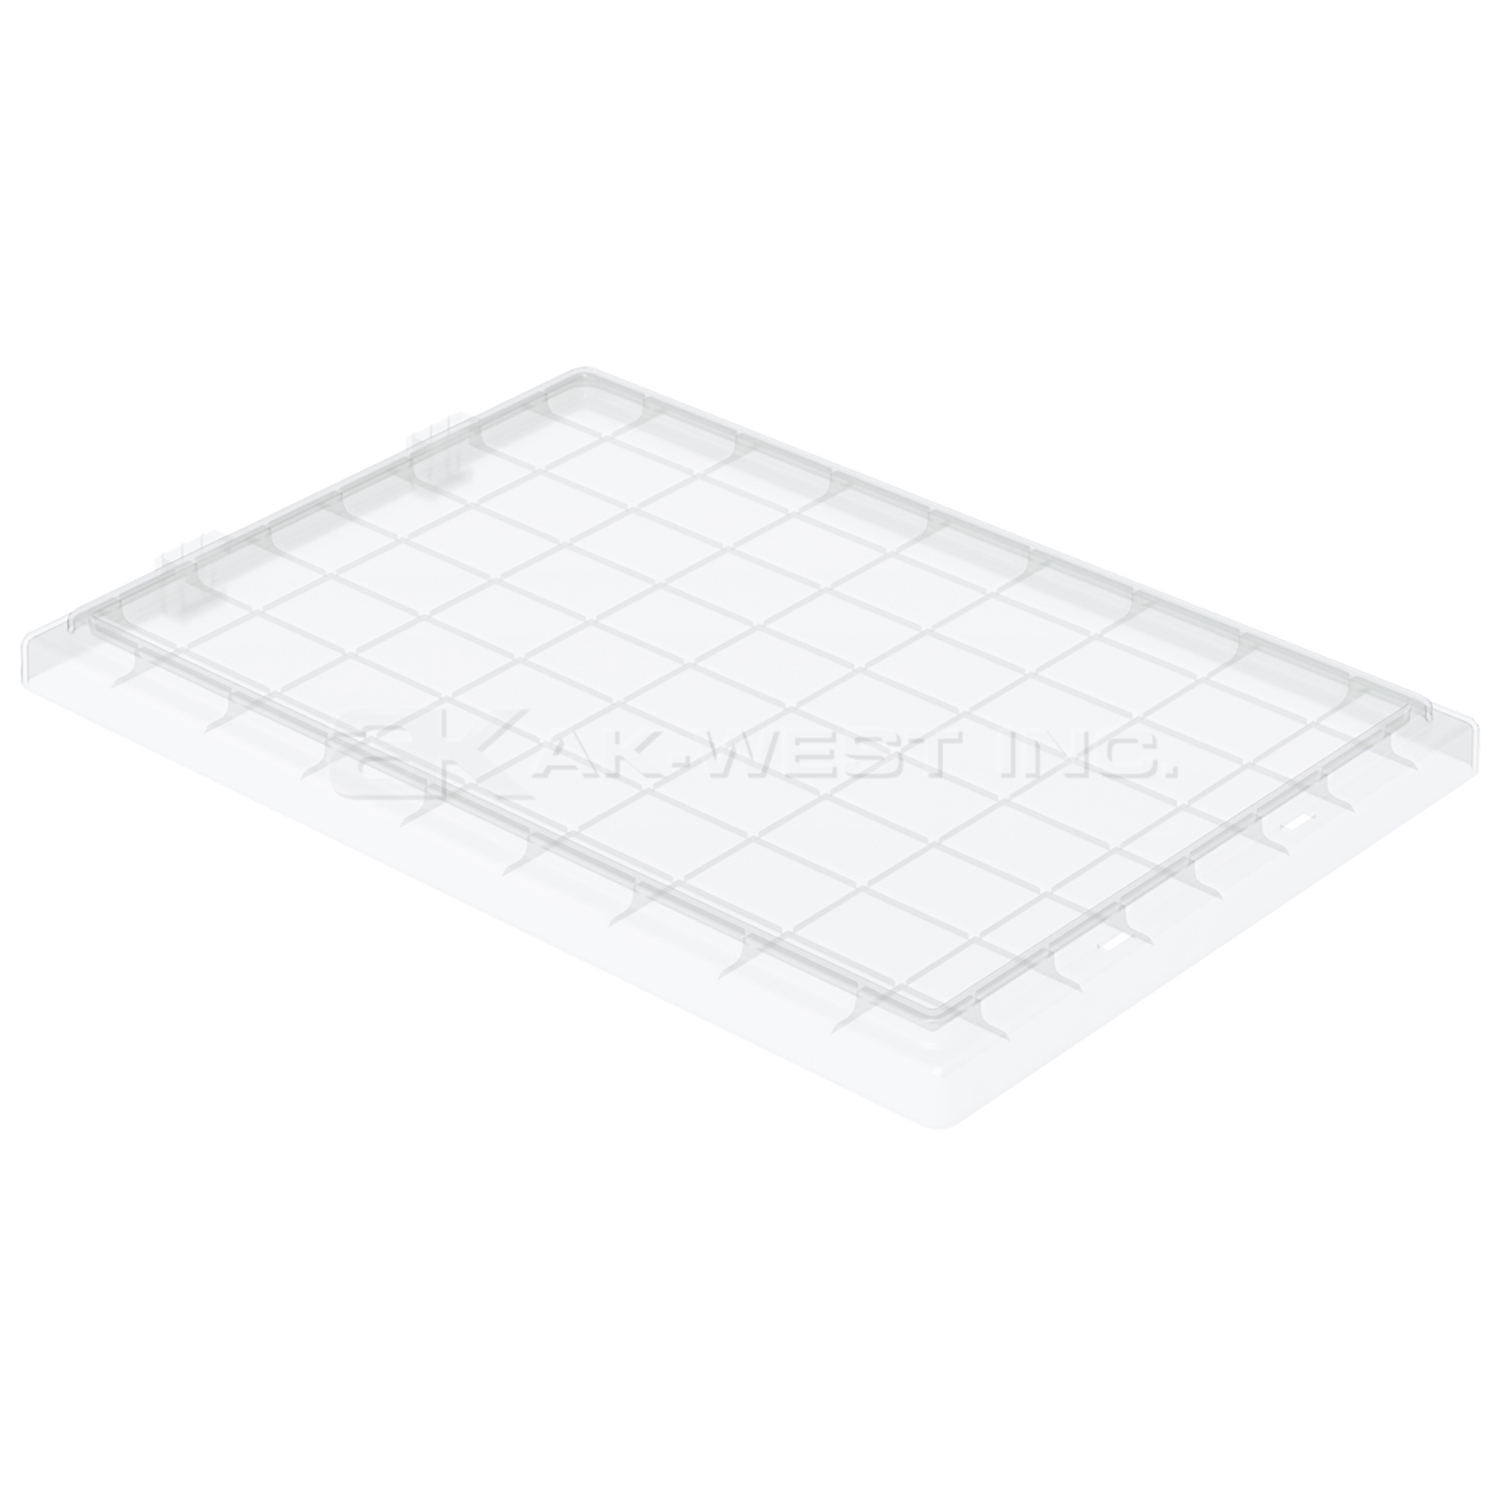 Clear, Lid For 35200 (6 Per Carton)